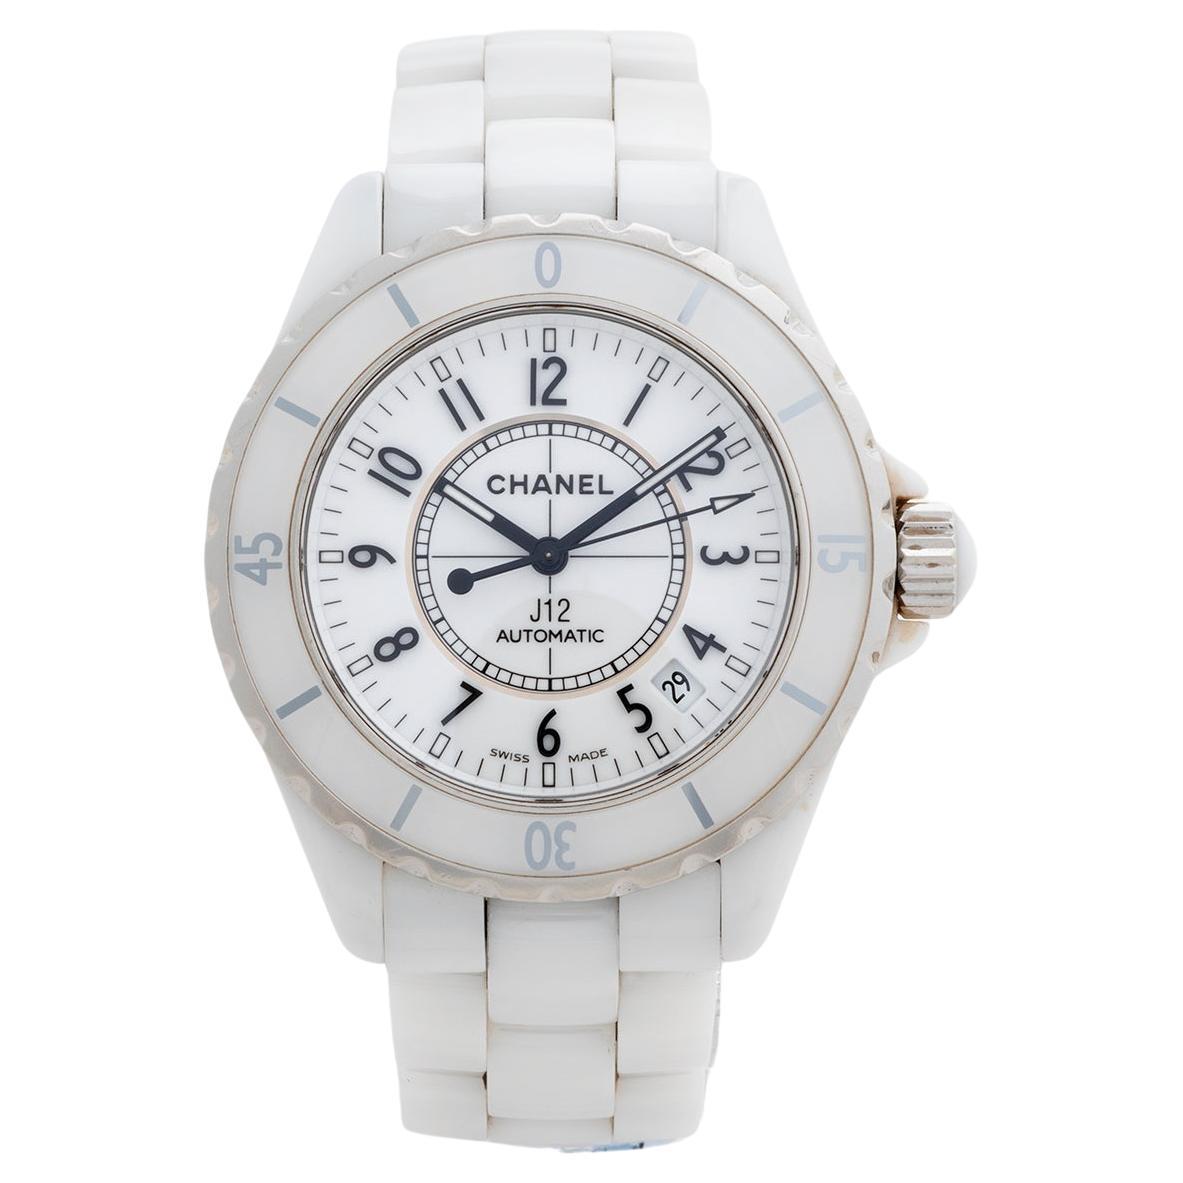 Chanel J12 White - 10 For Sale on 1stDibs  chanel watch j12 white, chanel  j12 automatic white ceramic watch, chanel white watch price